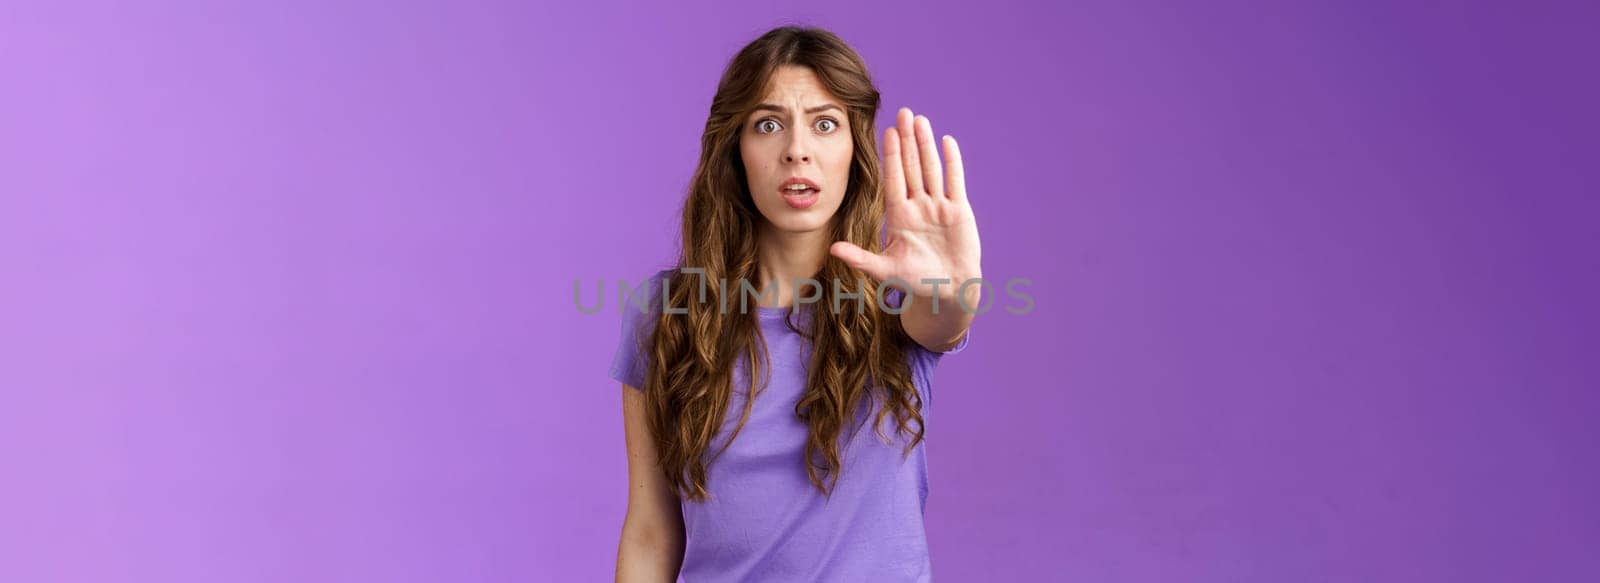 Worried shocked curly-haired woman gasping stare camera anxiously pull hand stop sign begging end prohibiting friend drive after drinking stand purple background forbid warn you purple background. Lifestyle.